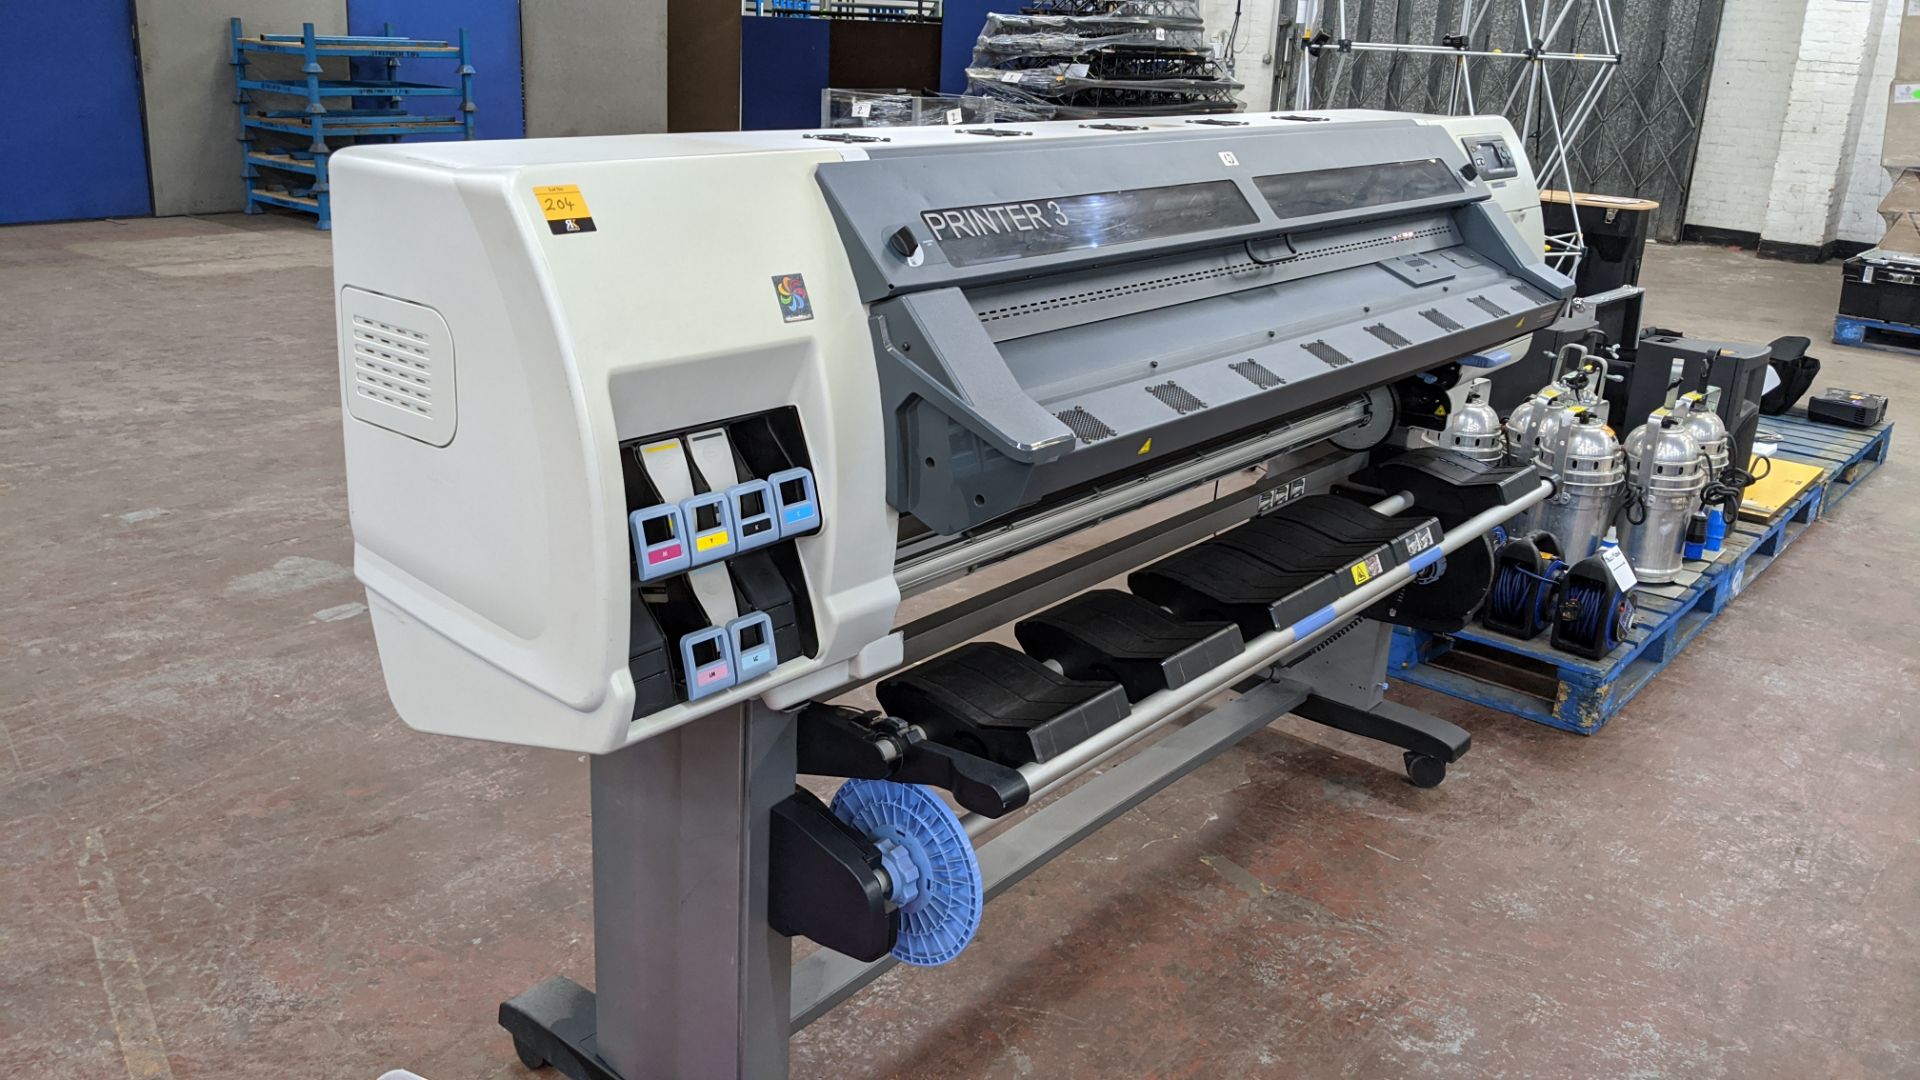 HP DesignJet L25500 wide format printer, serial no. MY0482900B, product no. CH956A/CH956-64001